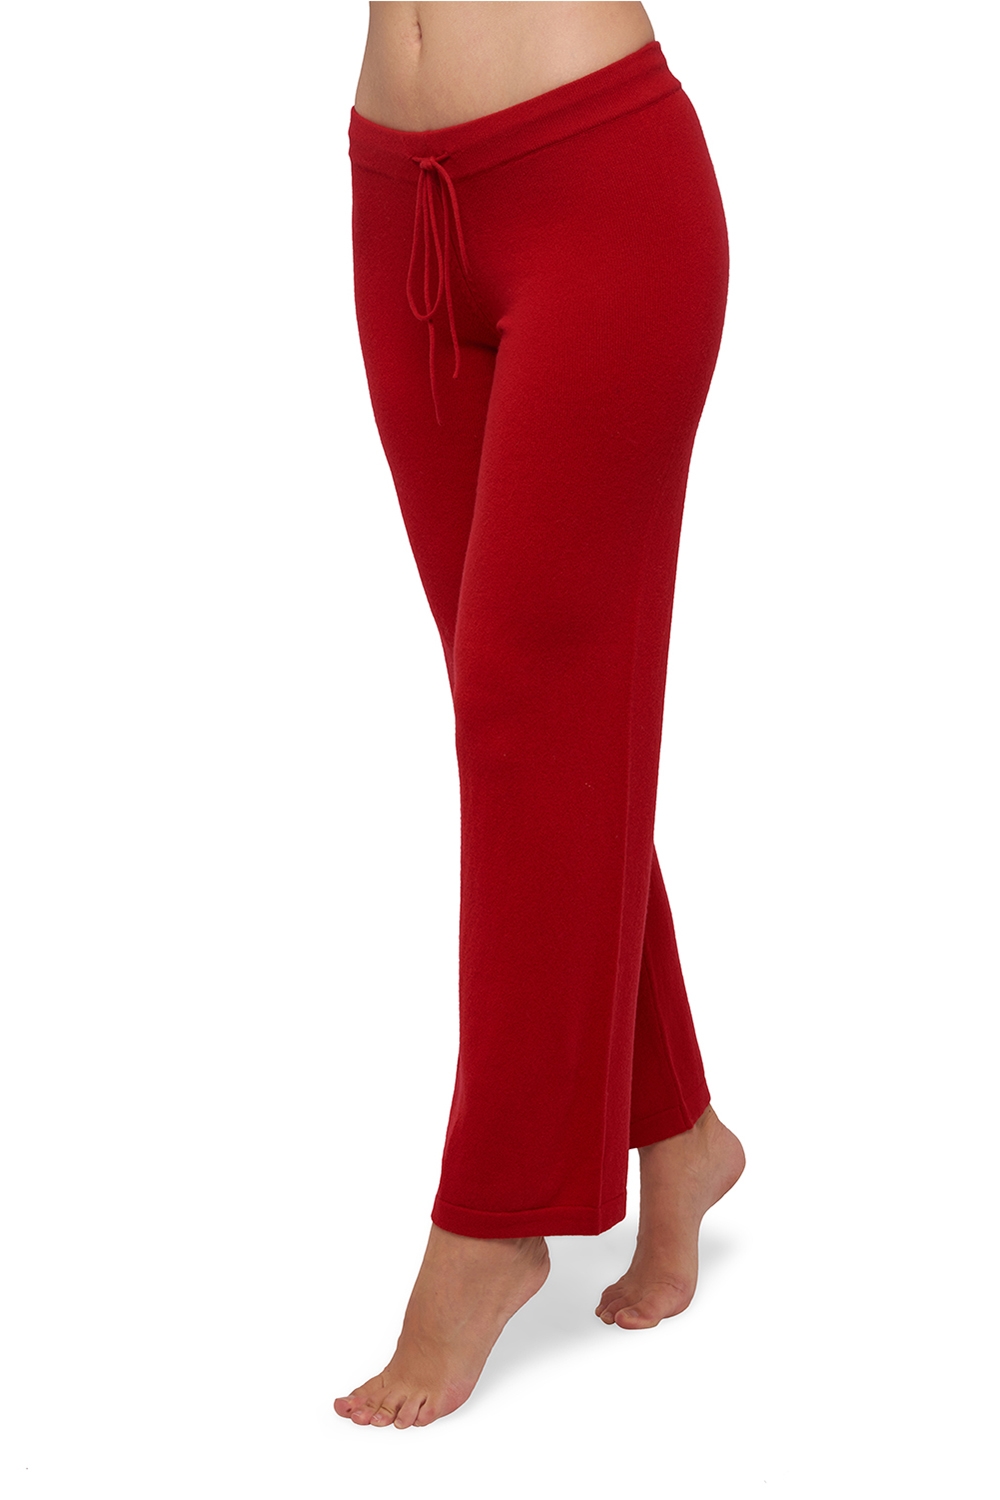 Cashmere ladies trousers leggings malice blood red xl